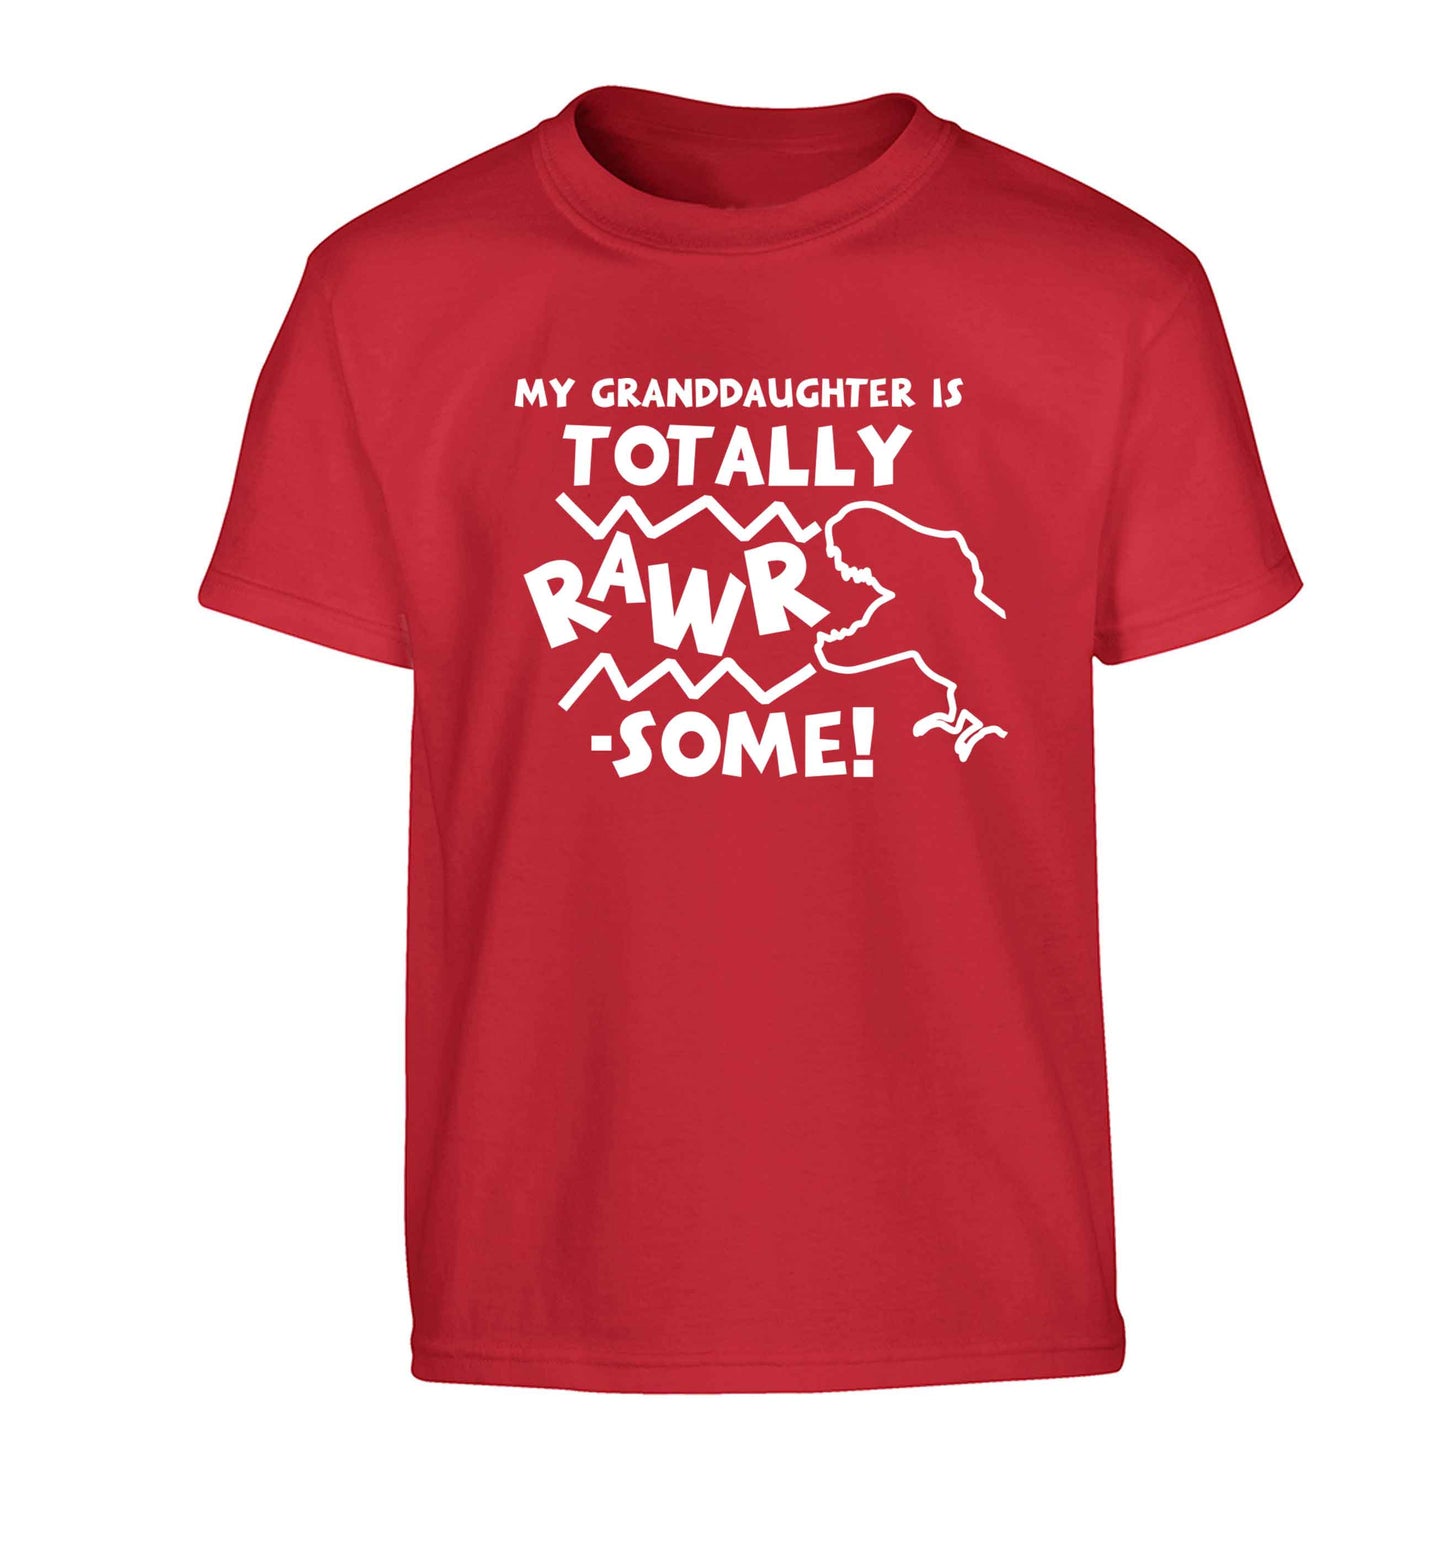 My granddaughter is totally rawrsome Children's red Tshirt 12-13 Years